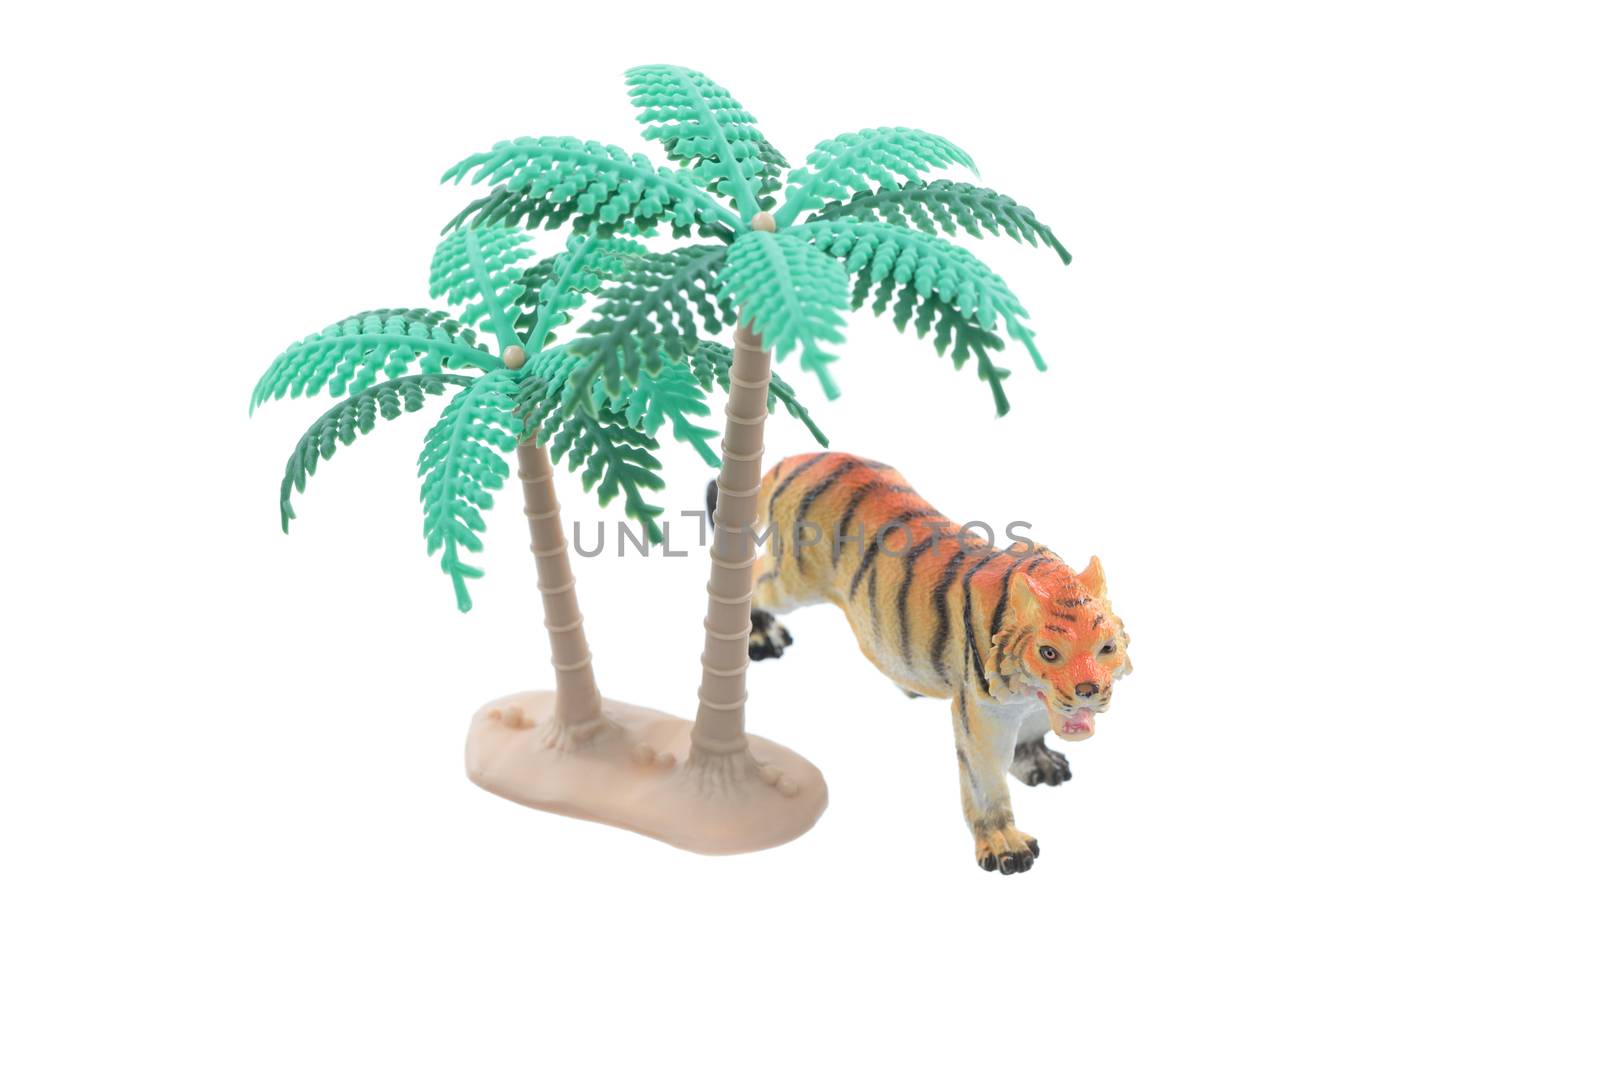 Toy Tiger with Trees by justtscott